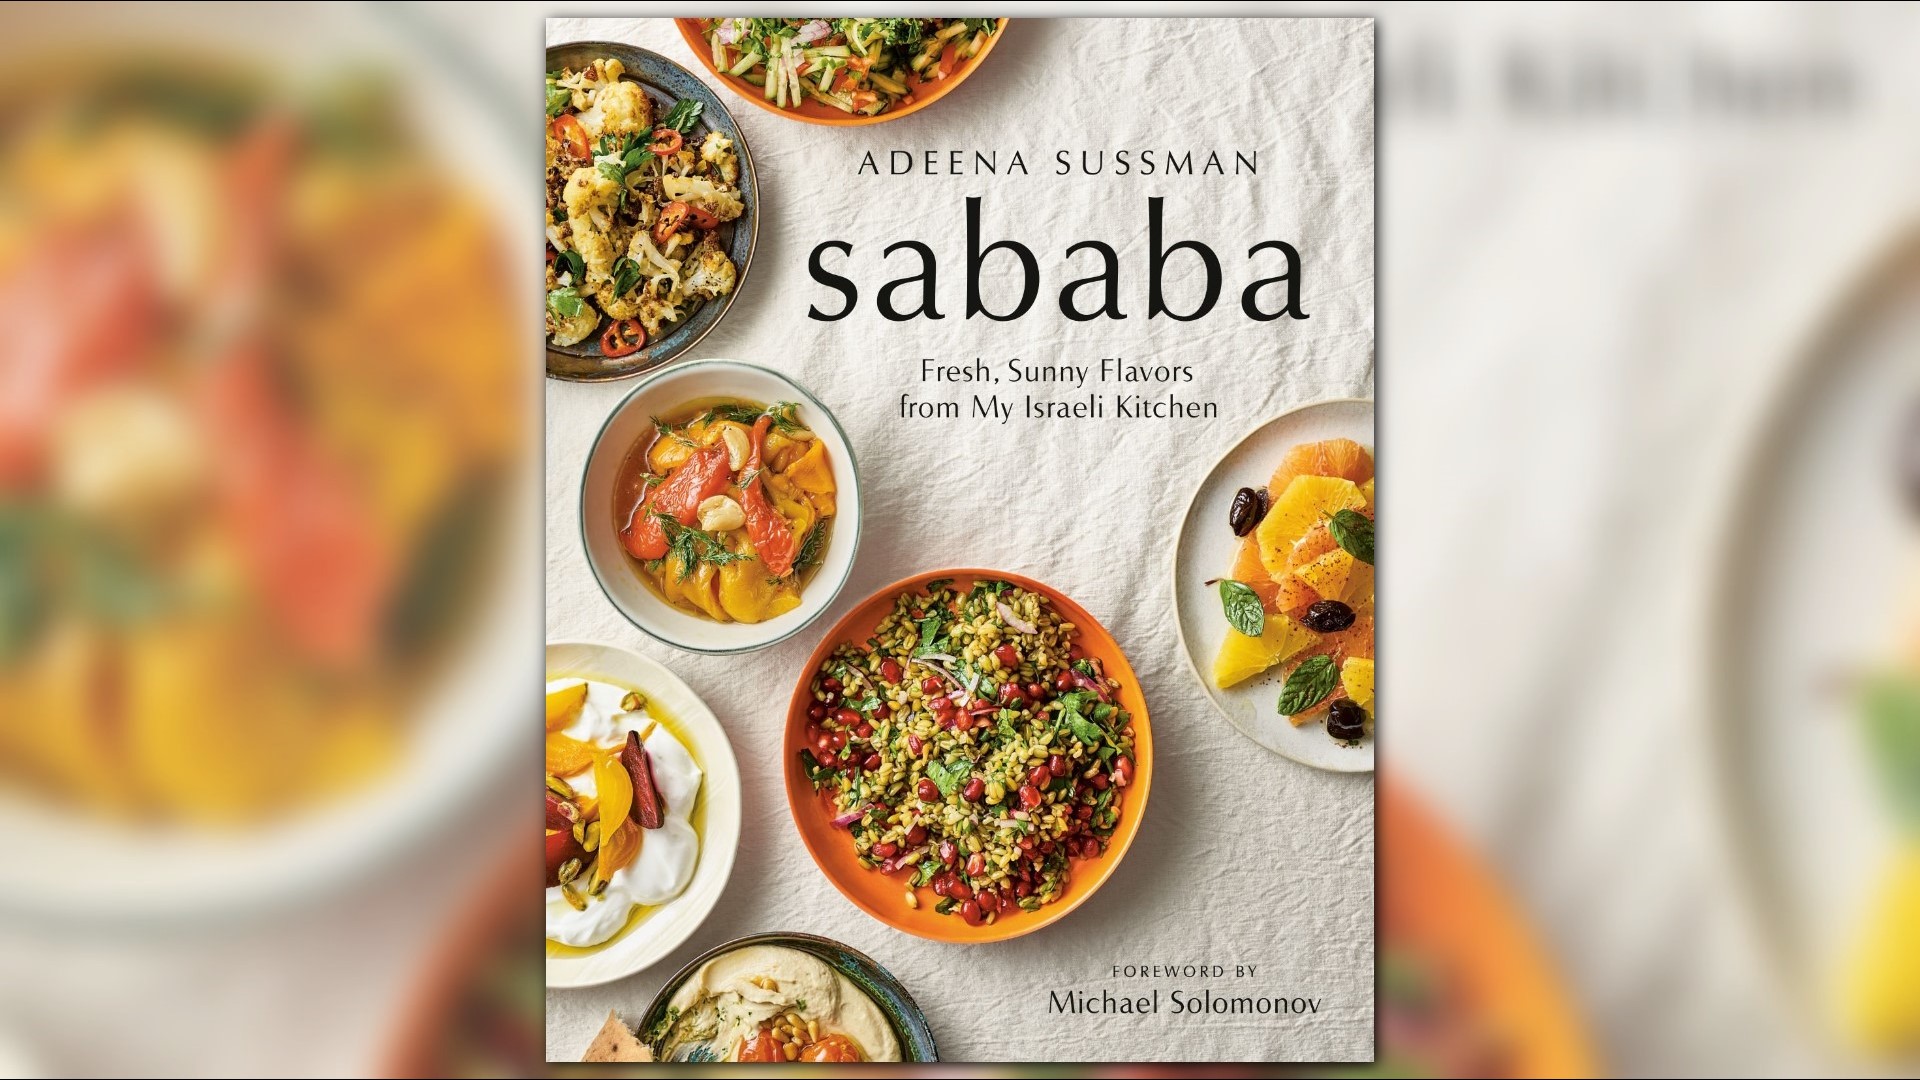 Expand your palette with a taste of Israeli cuisine! Chef Adeena Sussman talks about her new cookbook and shows off a few of her favorite dishes.